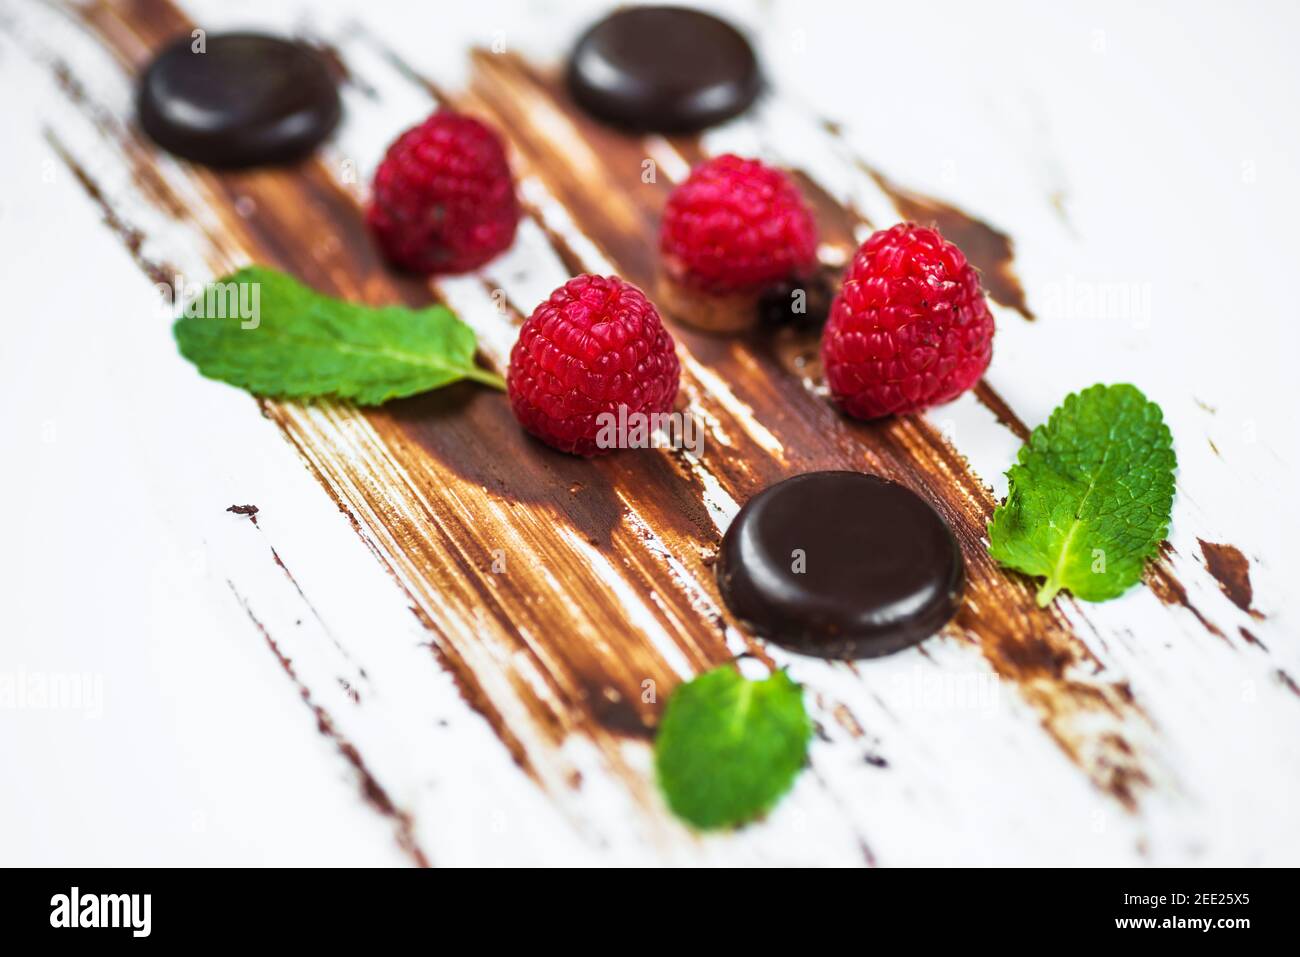 Raspberries, mint leaf and small chocolate wheel (pastille) on chocolate lines on slanting white background. Stock Photo